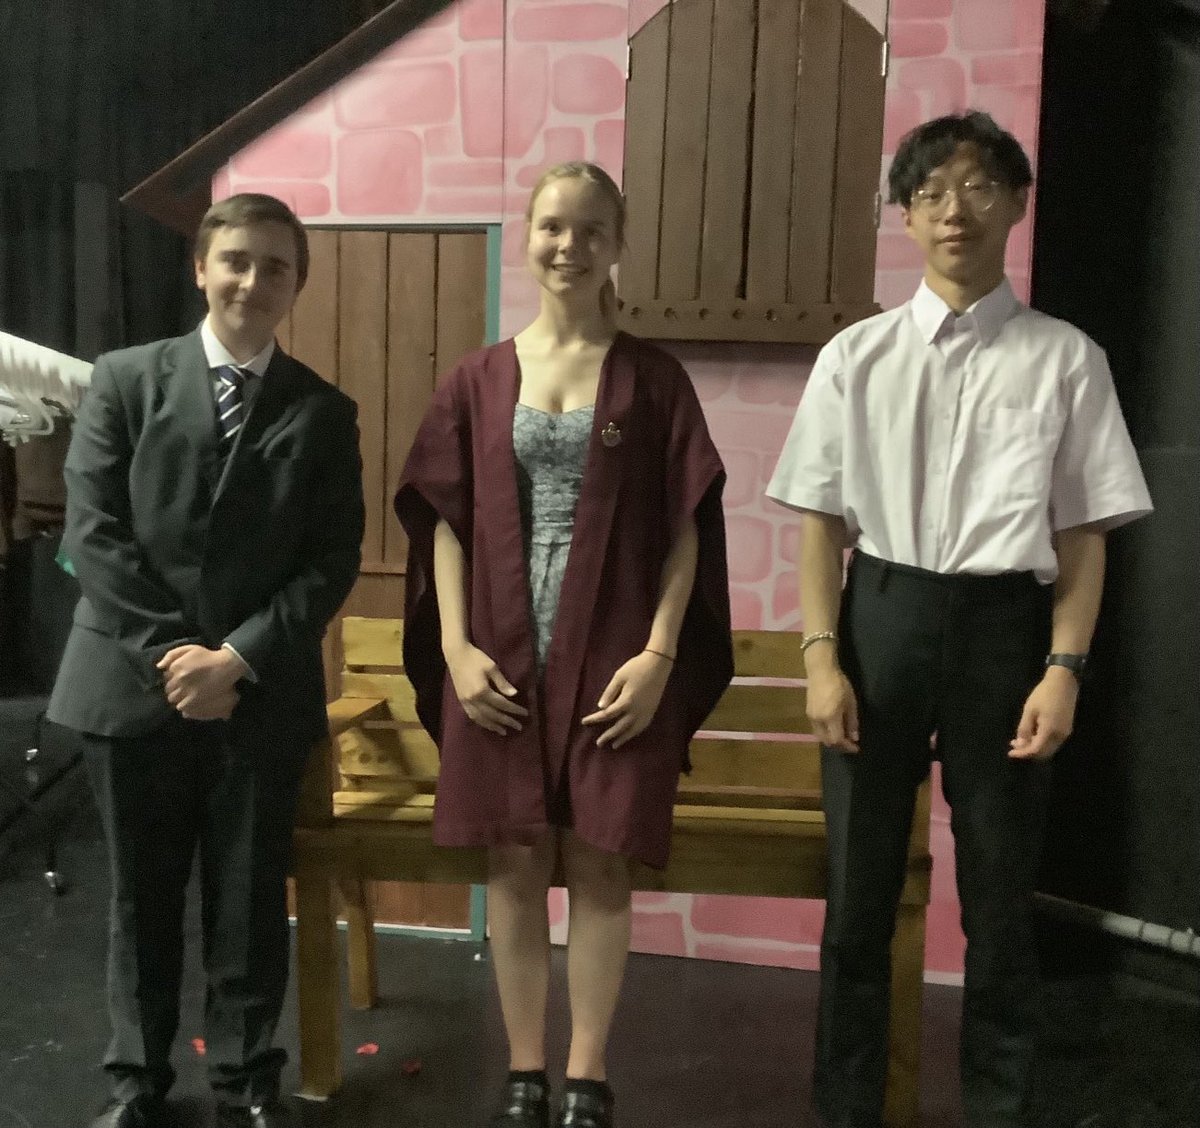 We are grateful to the GD prefects and BD monitors, who volunteered their time to assist the hundreds of visitors, who filled GD Theatre last week for performances of ‘Beauty and the Beast’. #BoltonVolunteer #BoltonYr12